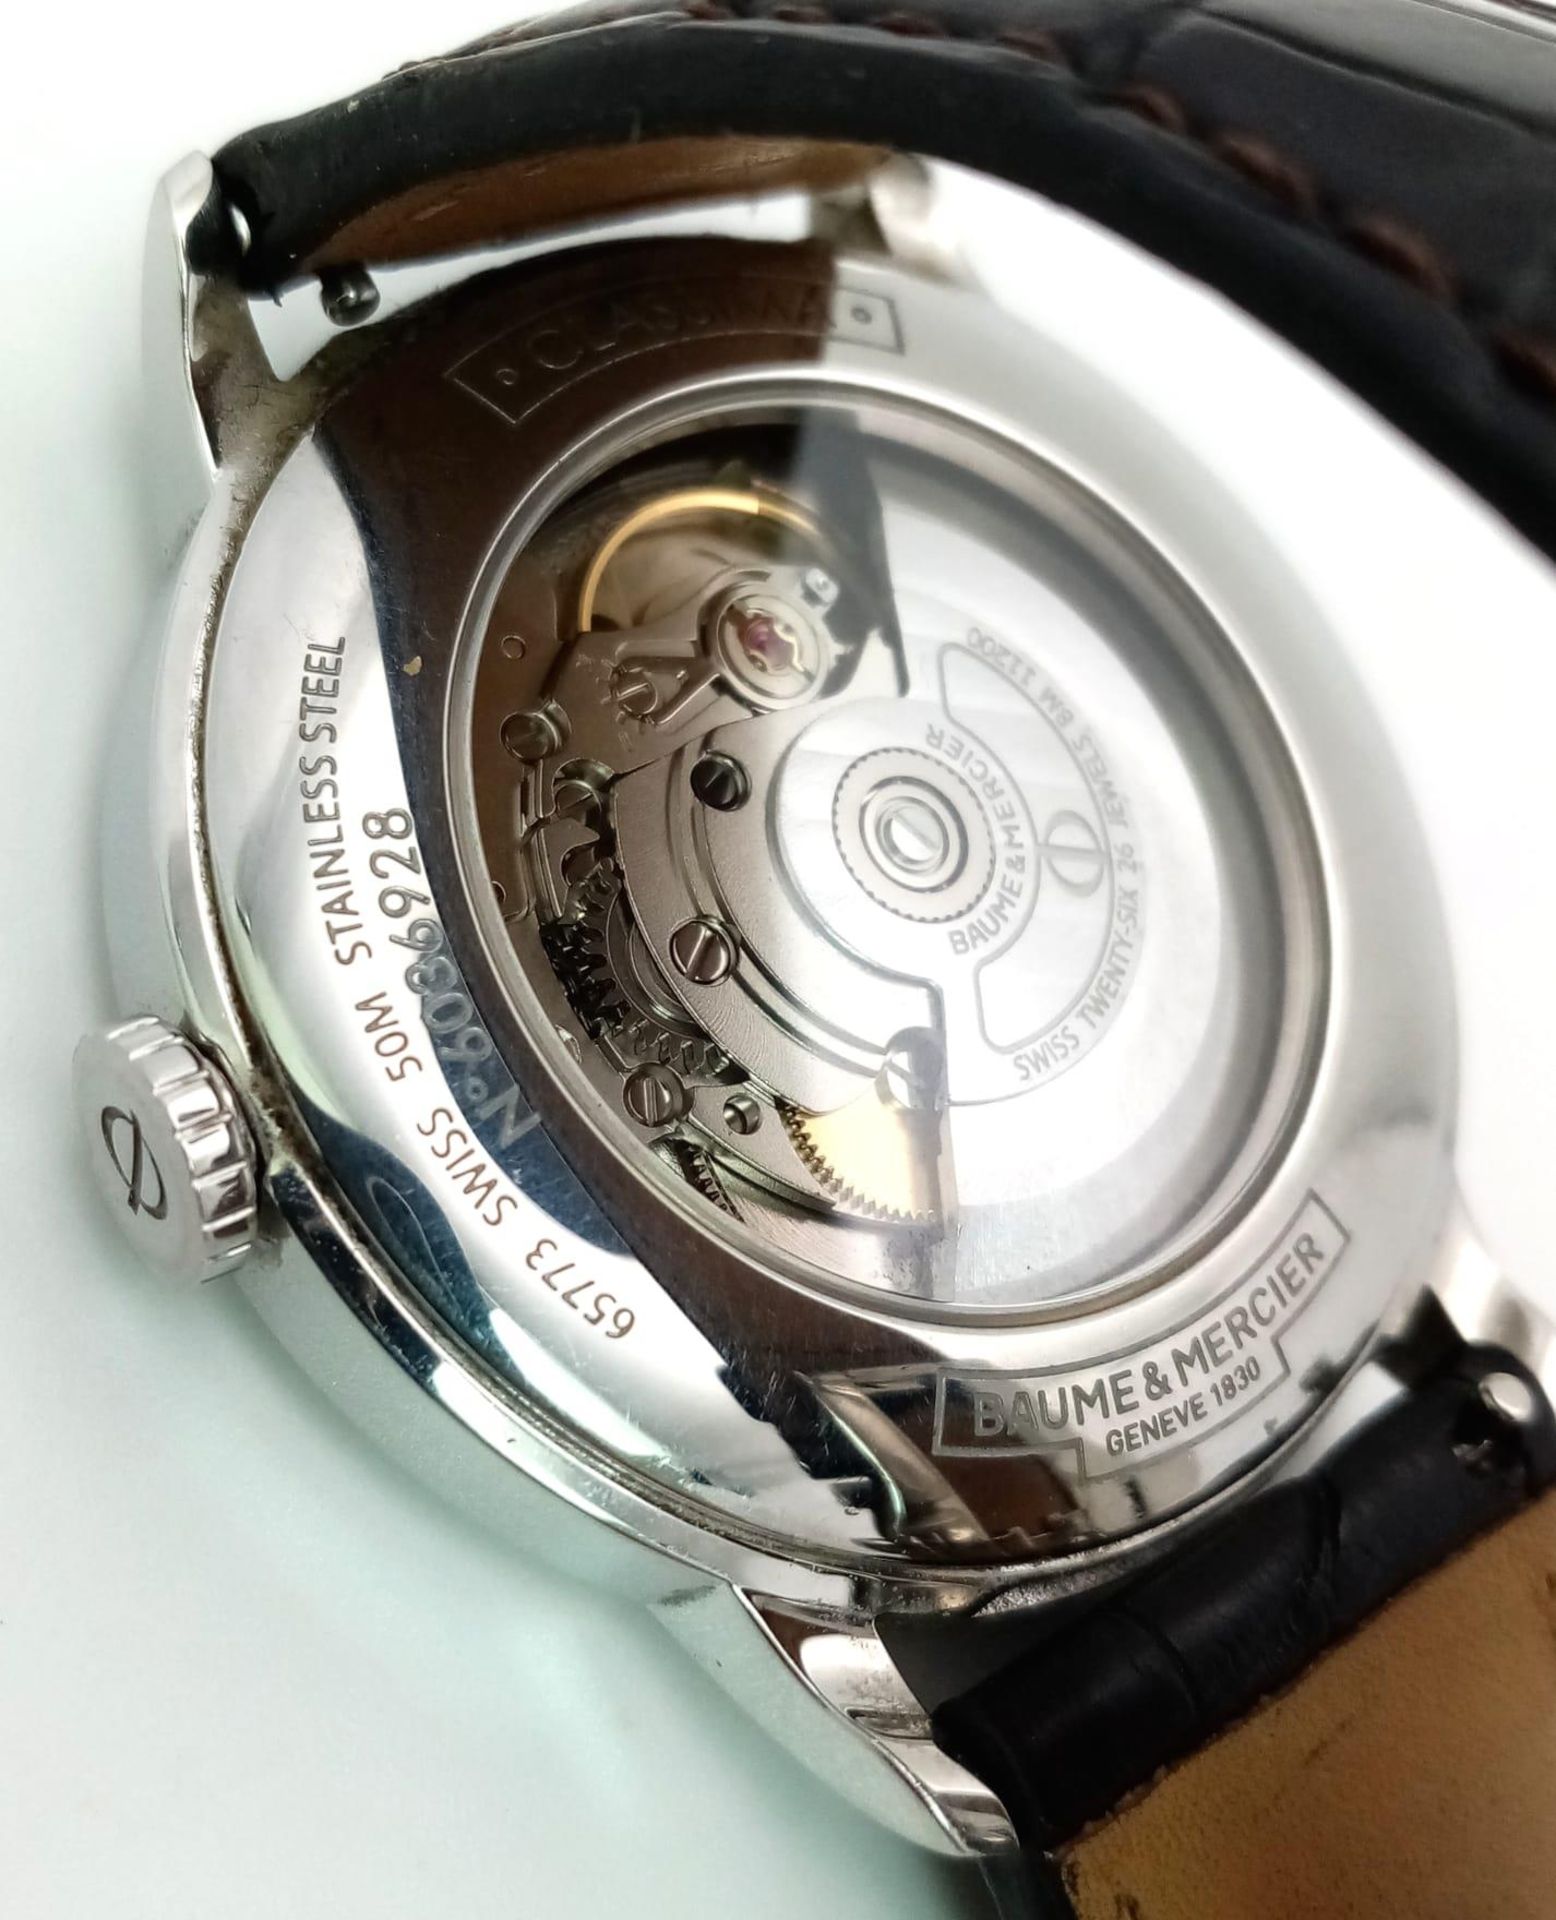 A Baume and Mercier Automatic Gents Watch. Original leather strap. Stainless steel case with - Image 5 of 8